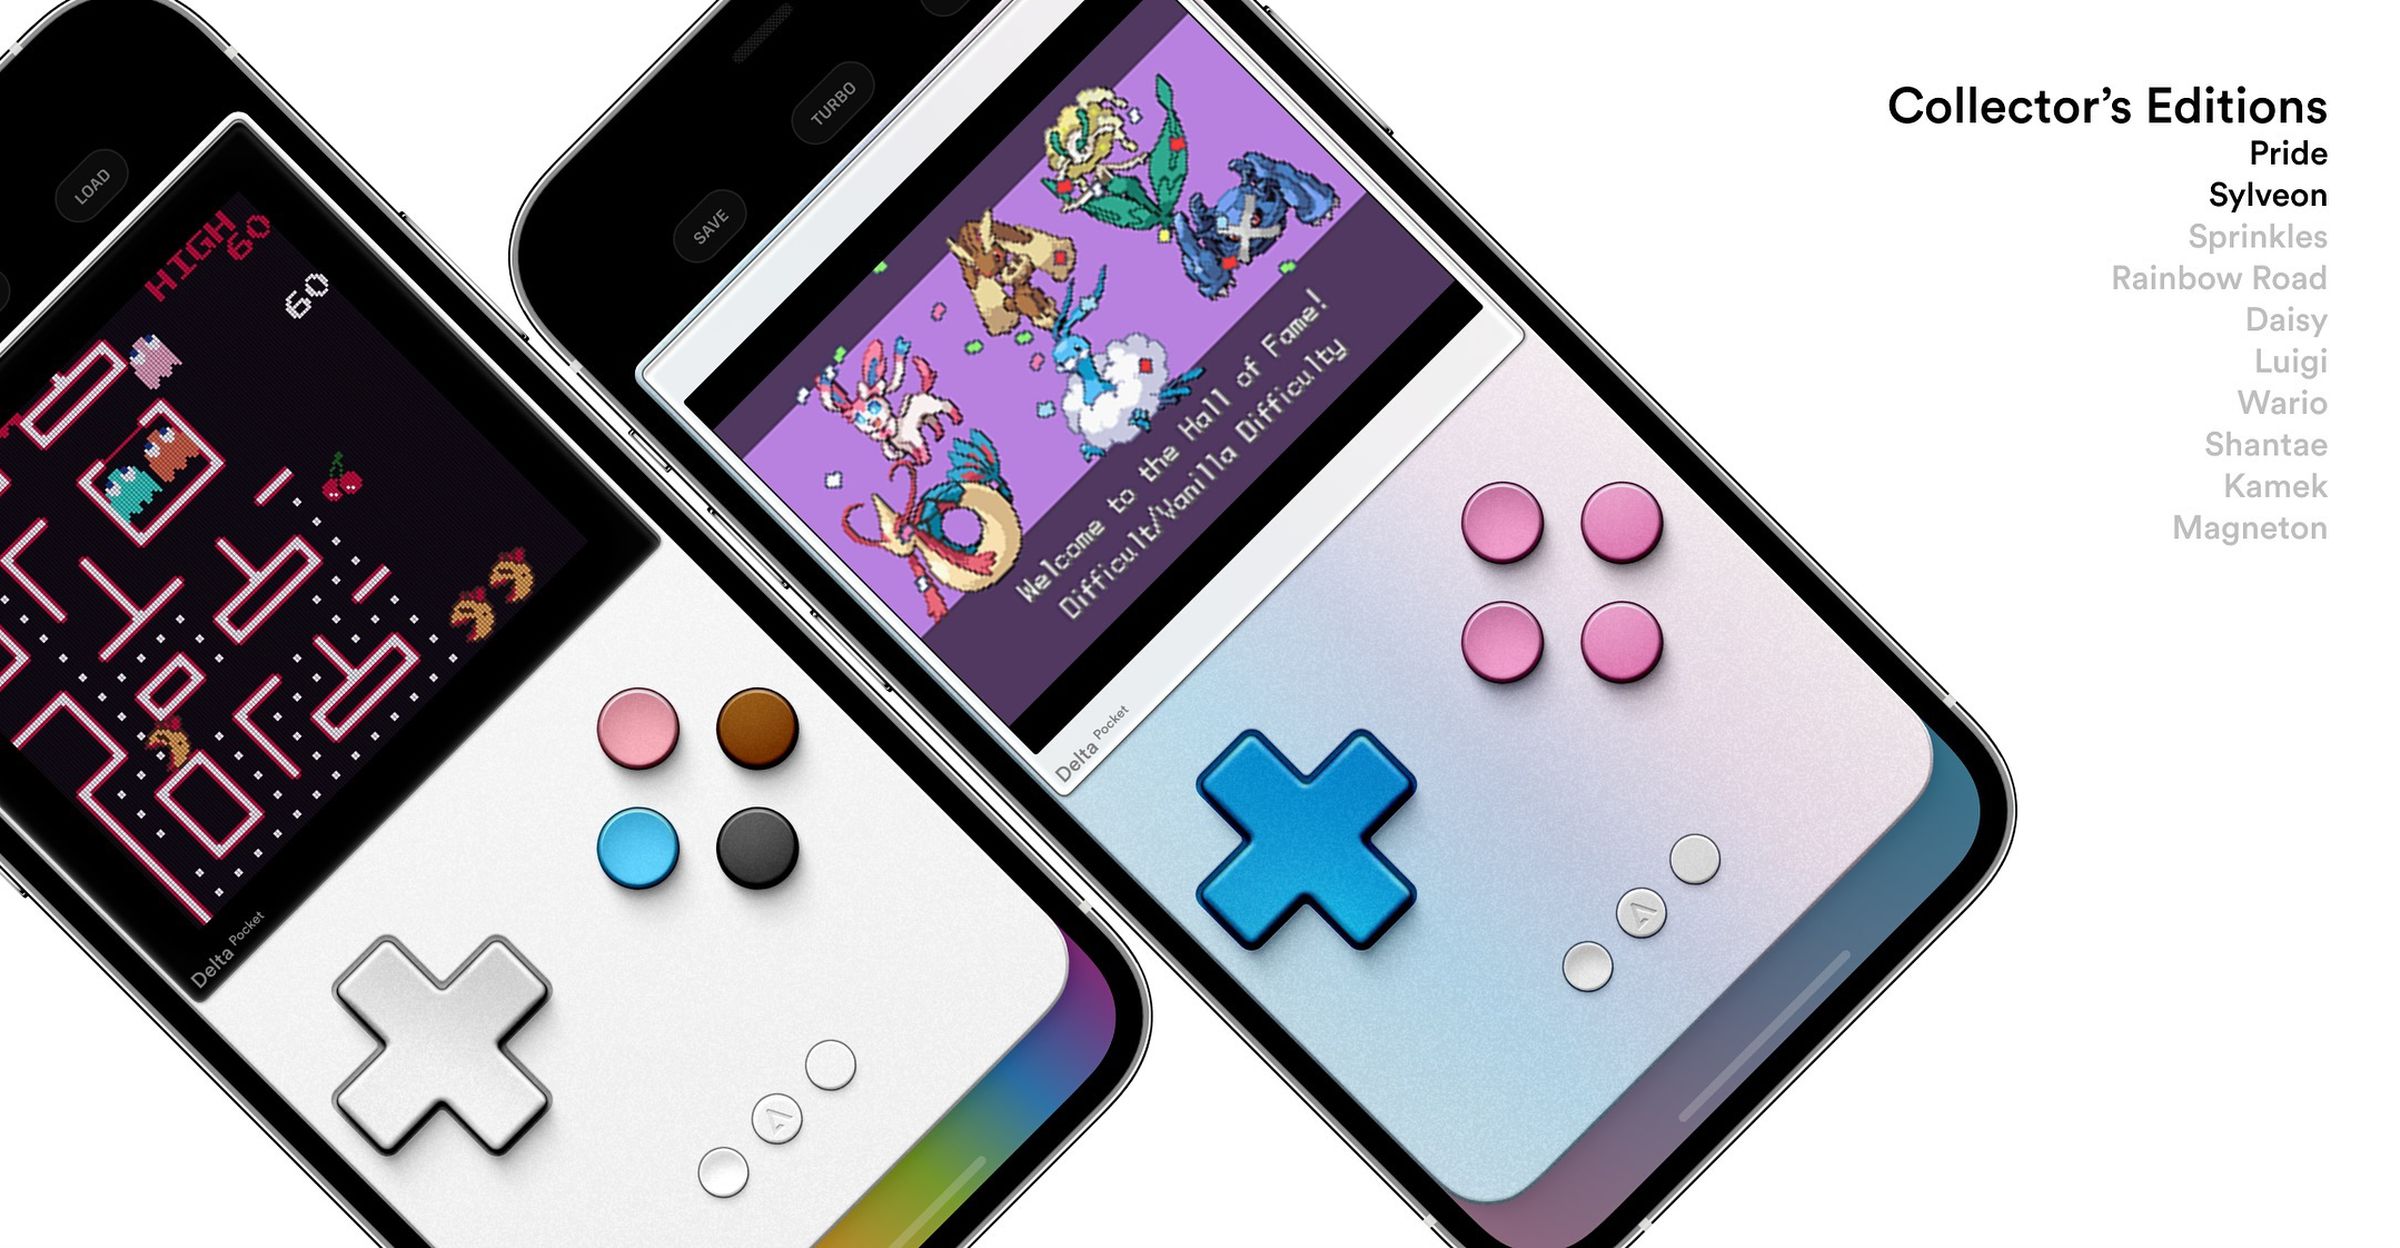 Two skins showing trangender flag colors, one as a blue-to-pink gradient with pink buttons and a blue d-pad, one all white except for the buttons, which are pink, blue, brown, and black.